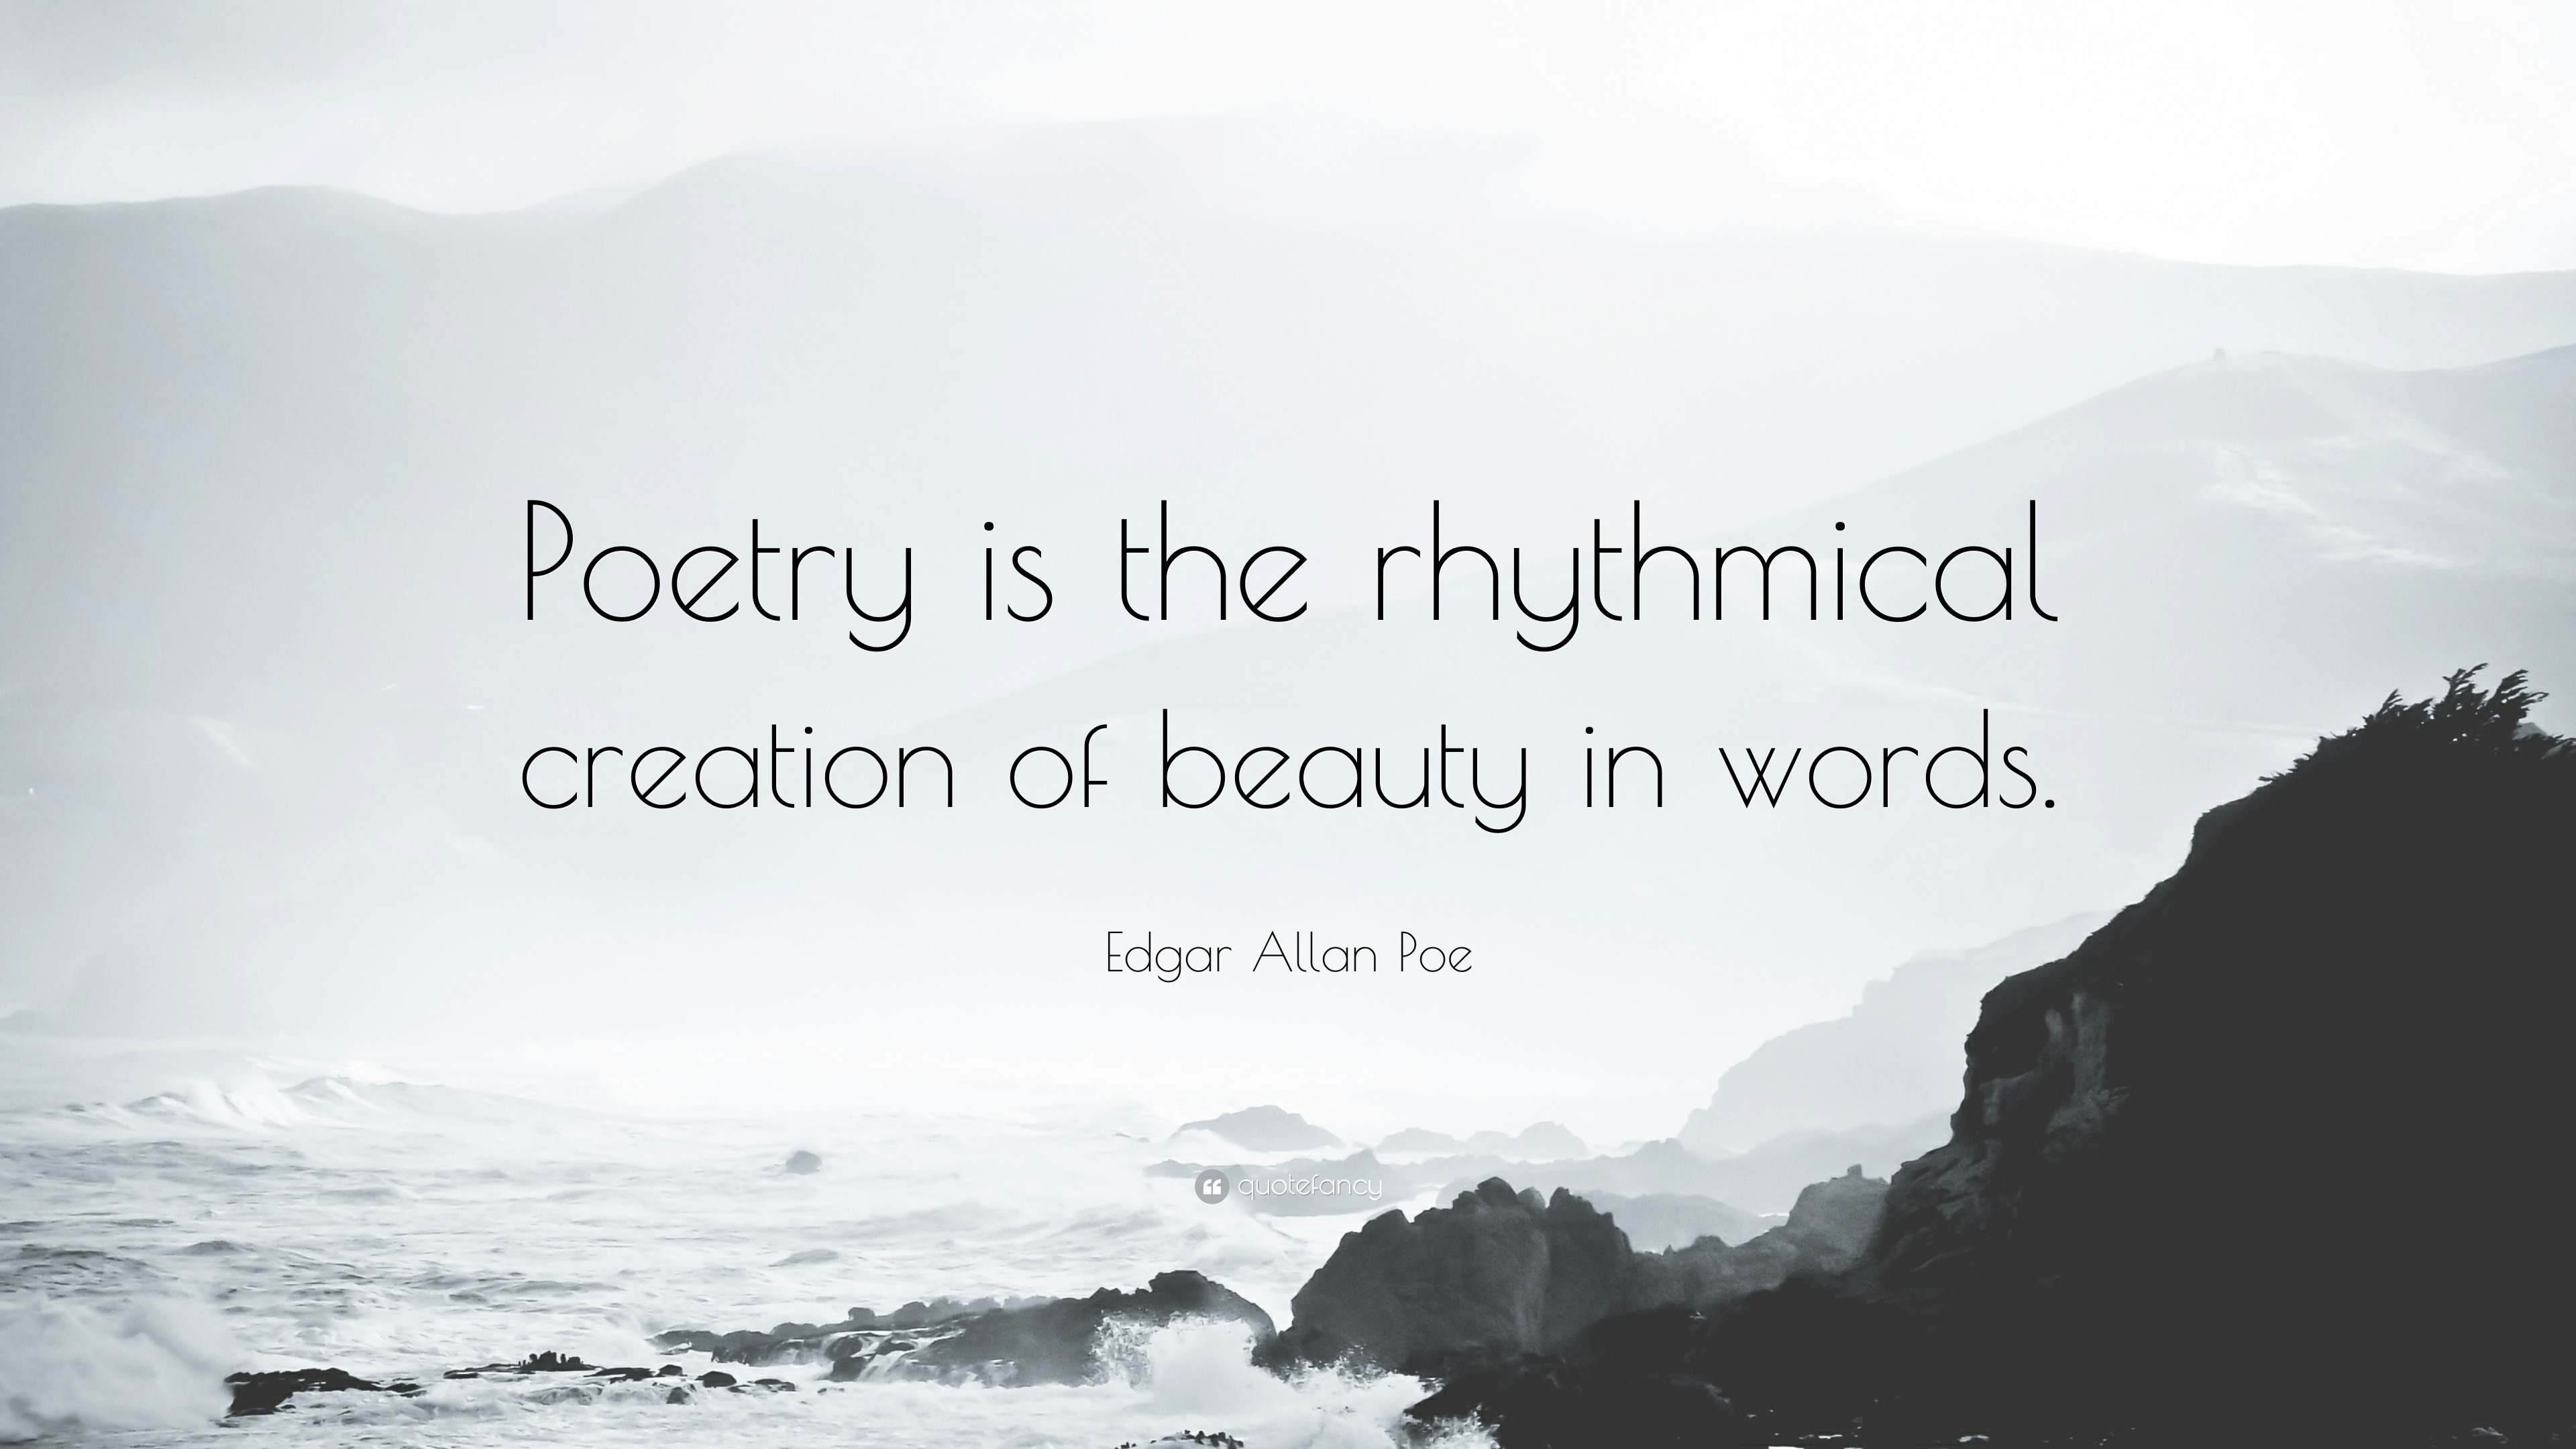 Image result for poetry is the rhythmical creation of beauty in words